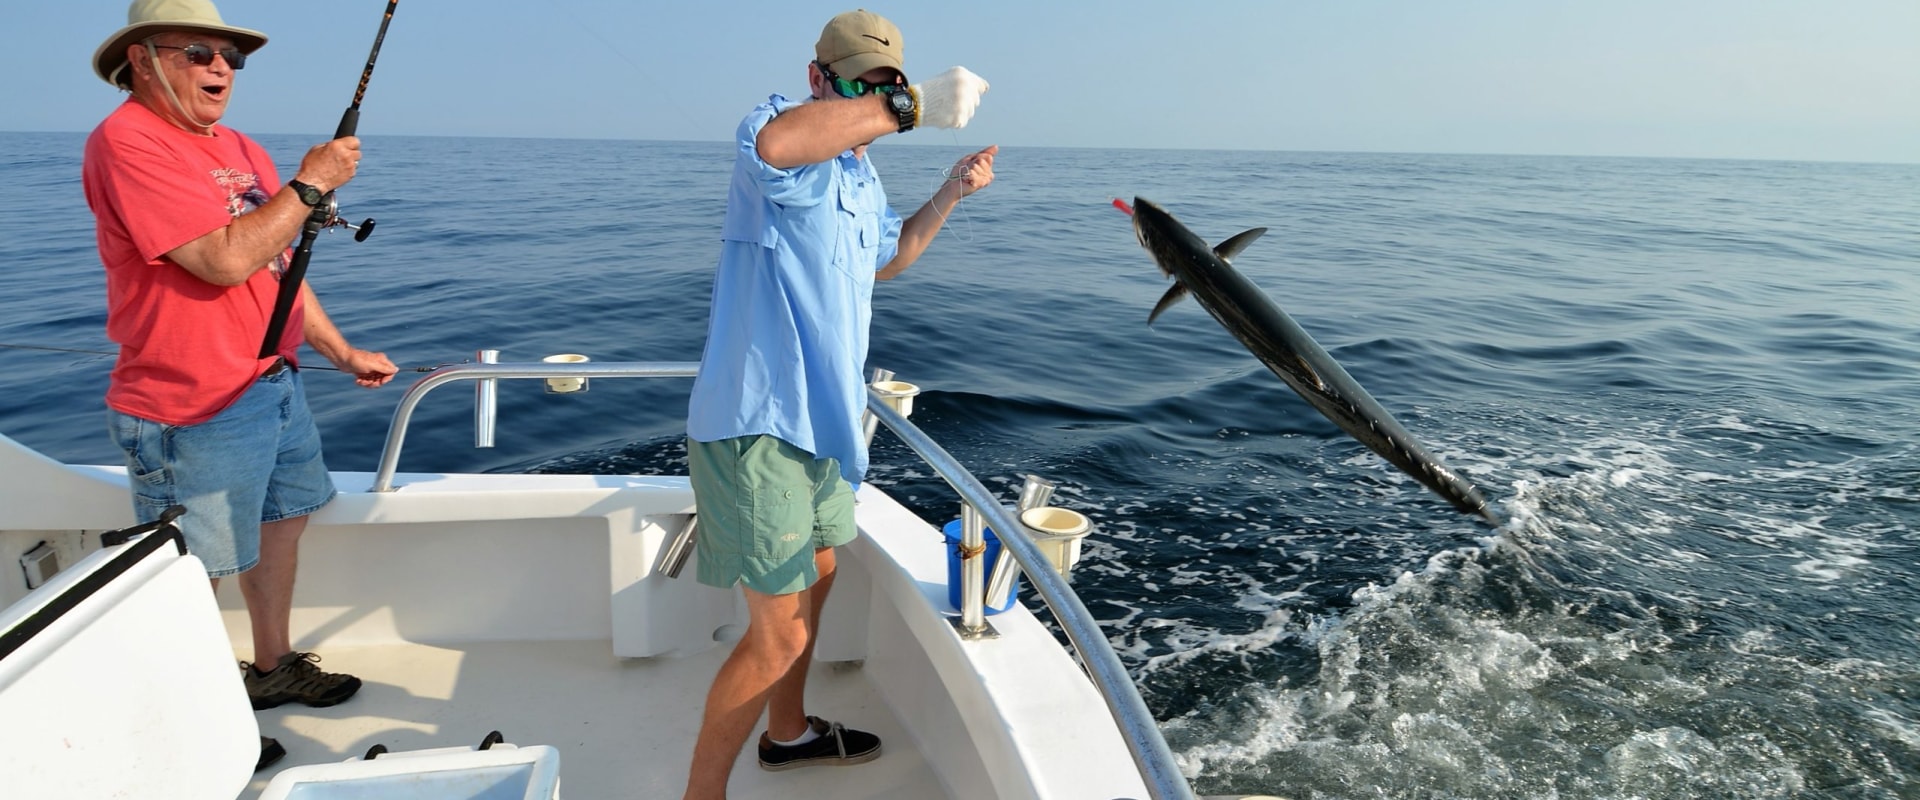 Do fishing charters provide rods?